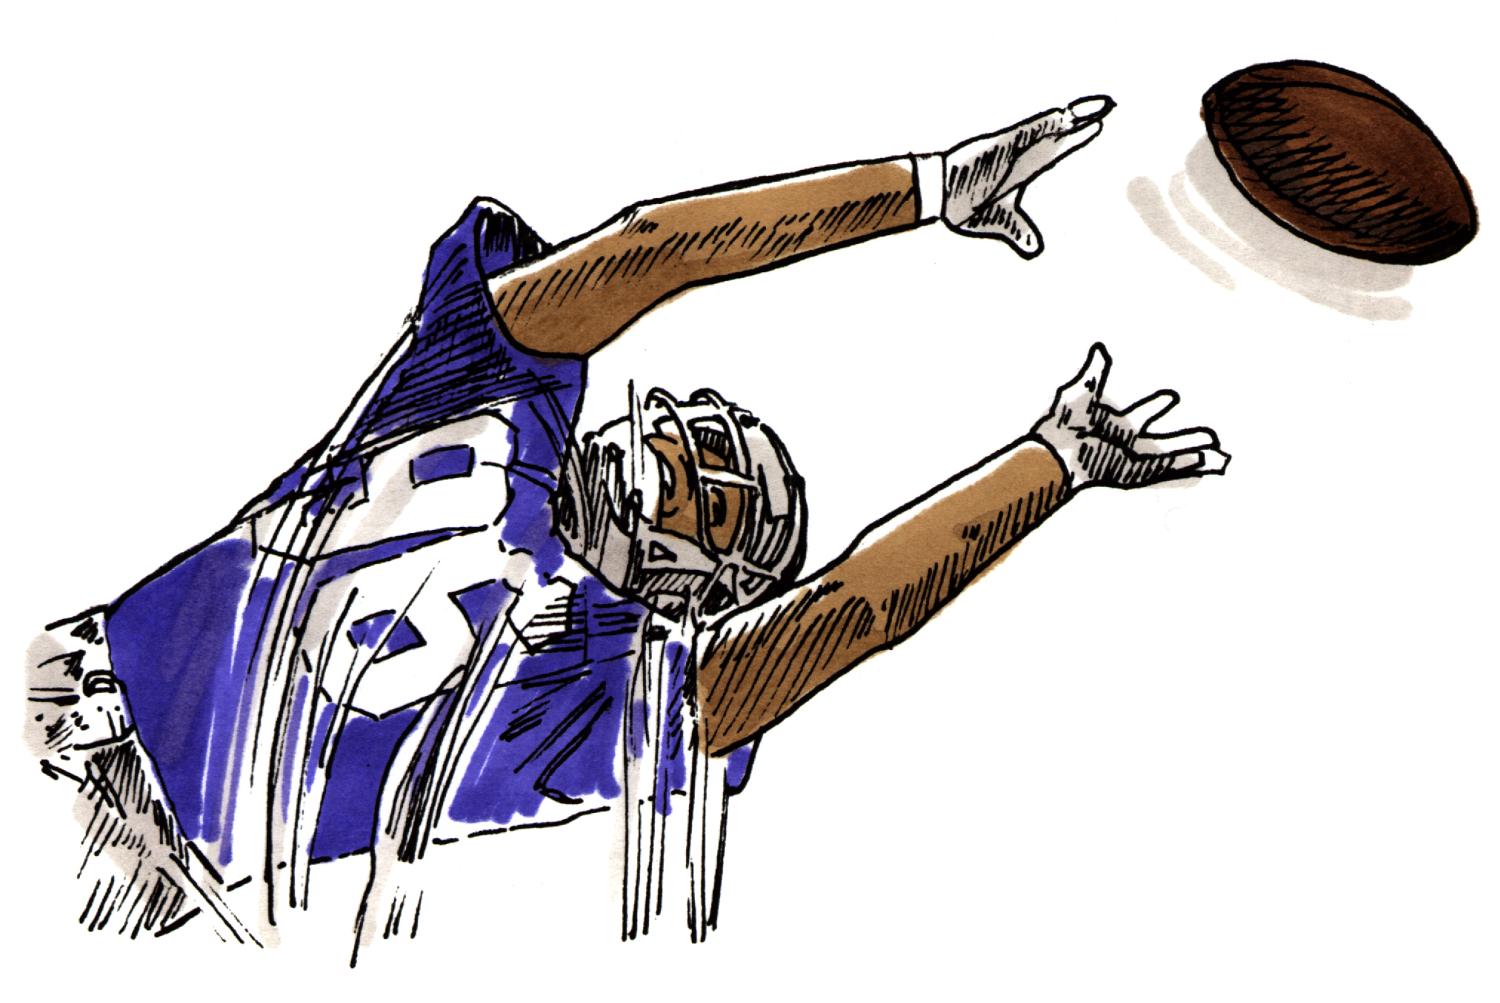 Football Player Football Image 2 Png Image Clipart